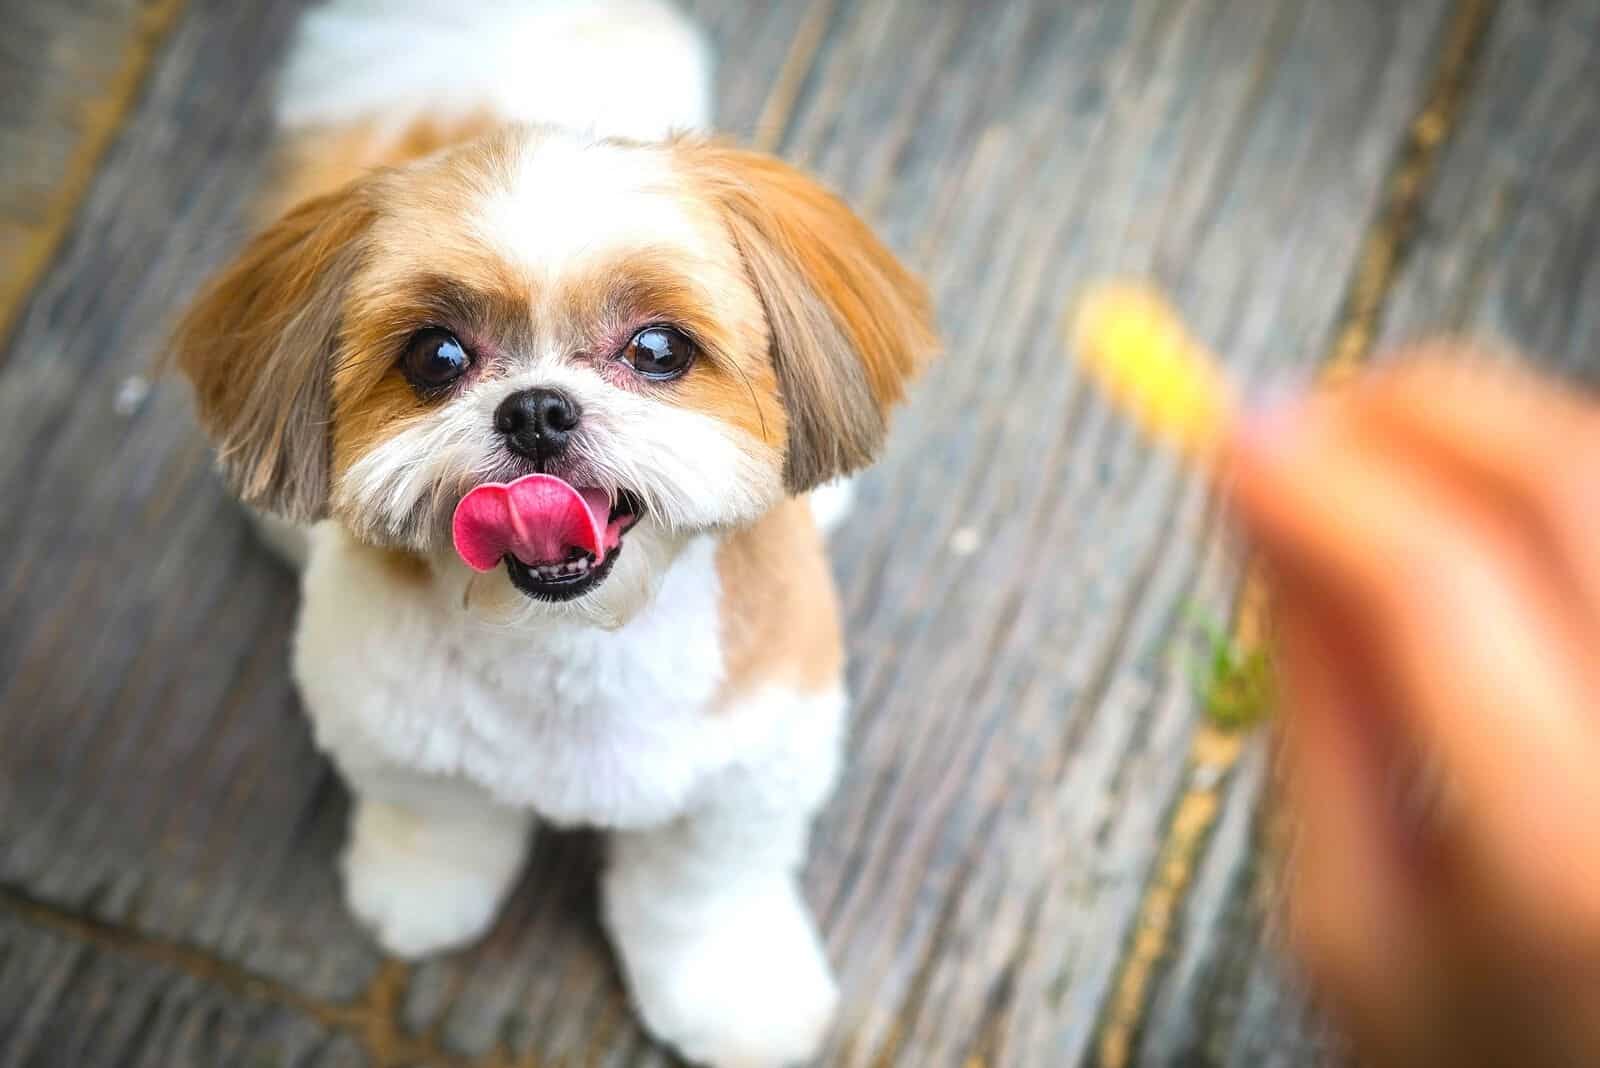 young shih tzu looking at the snack at the hand of the owner